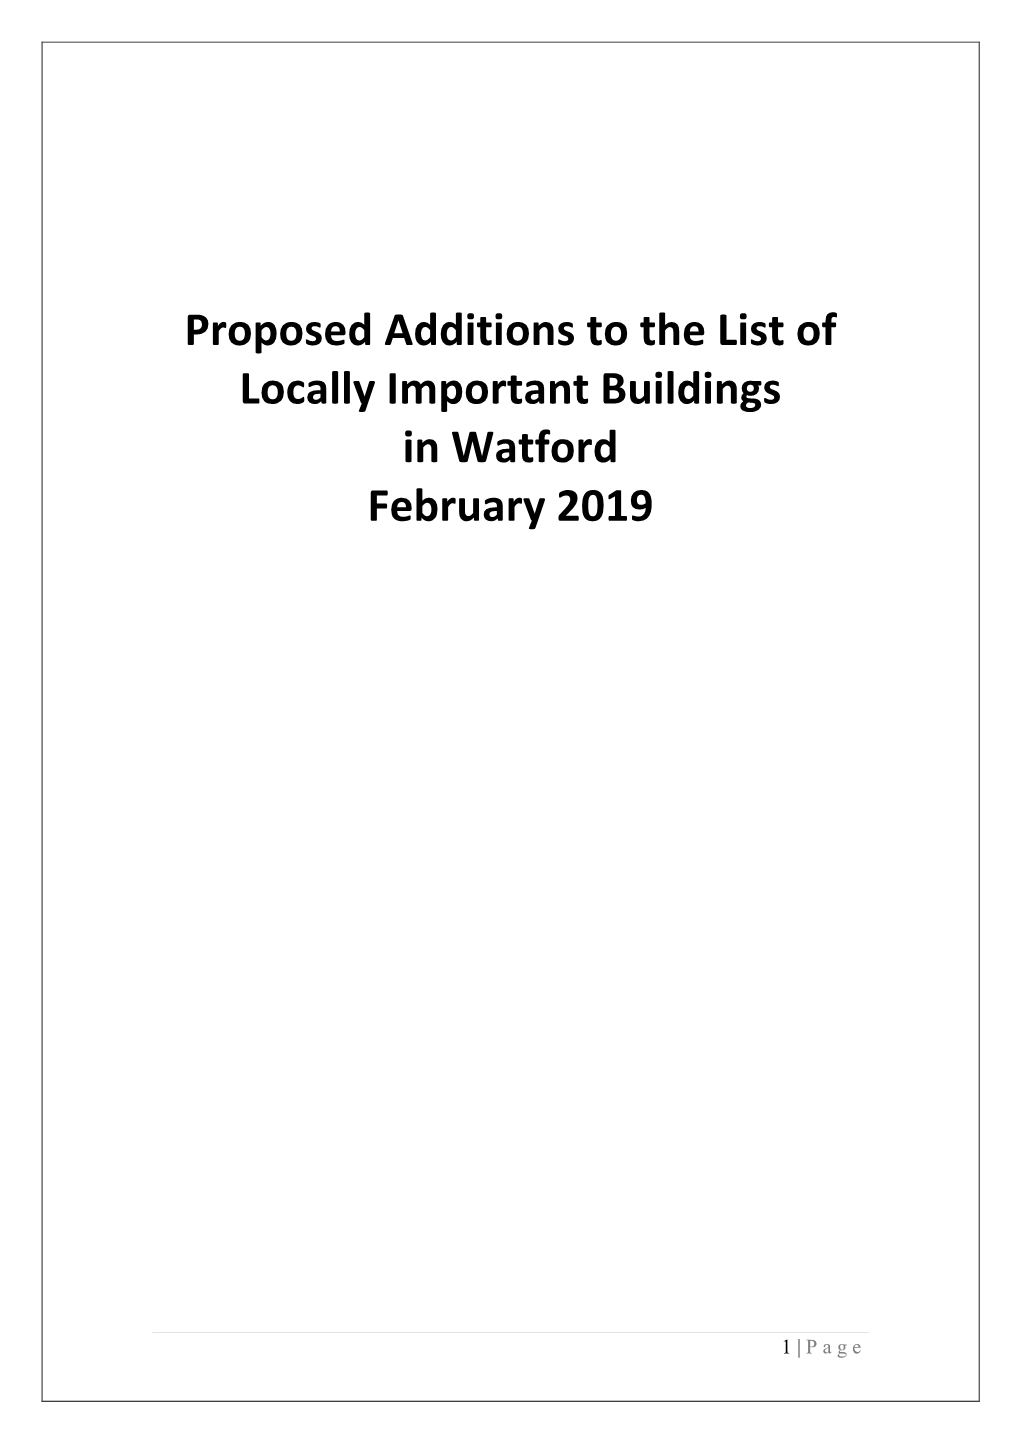 Proposed Additions to the List of Locally Important Buildings in Watford February 2019